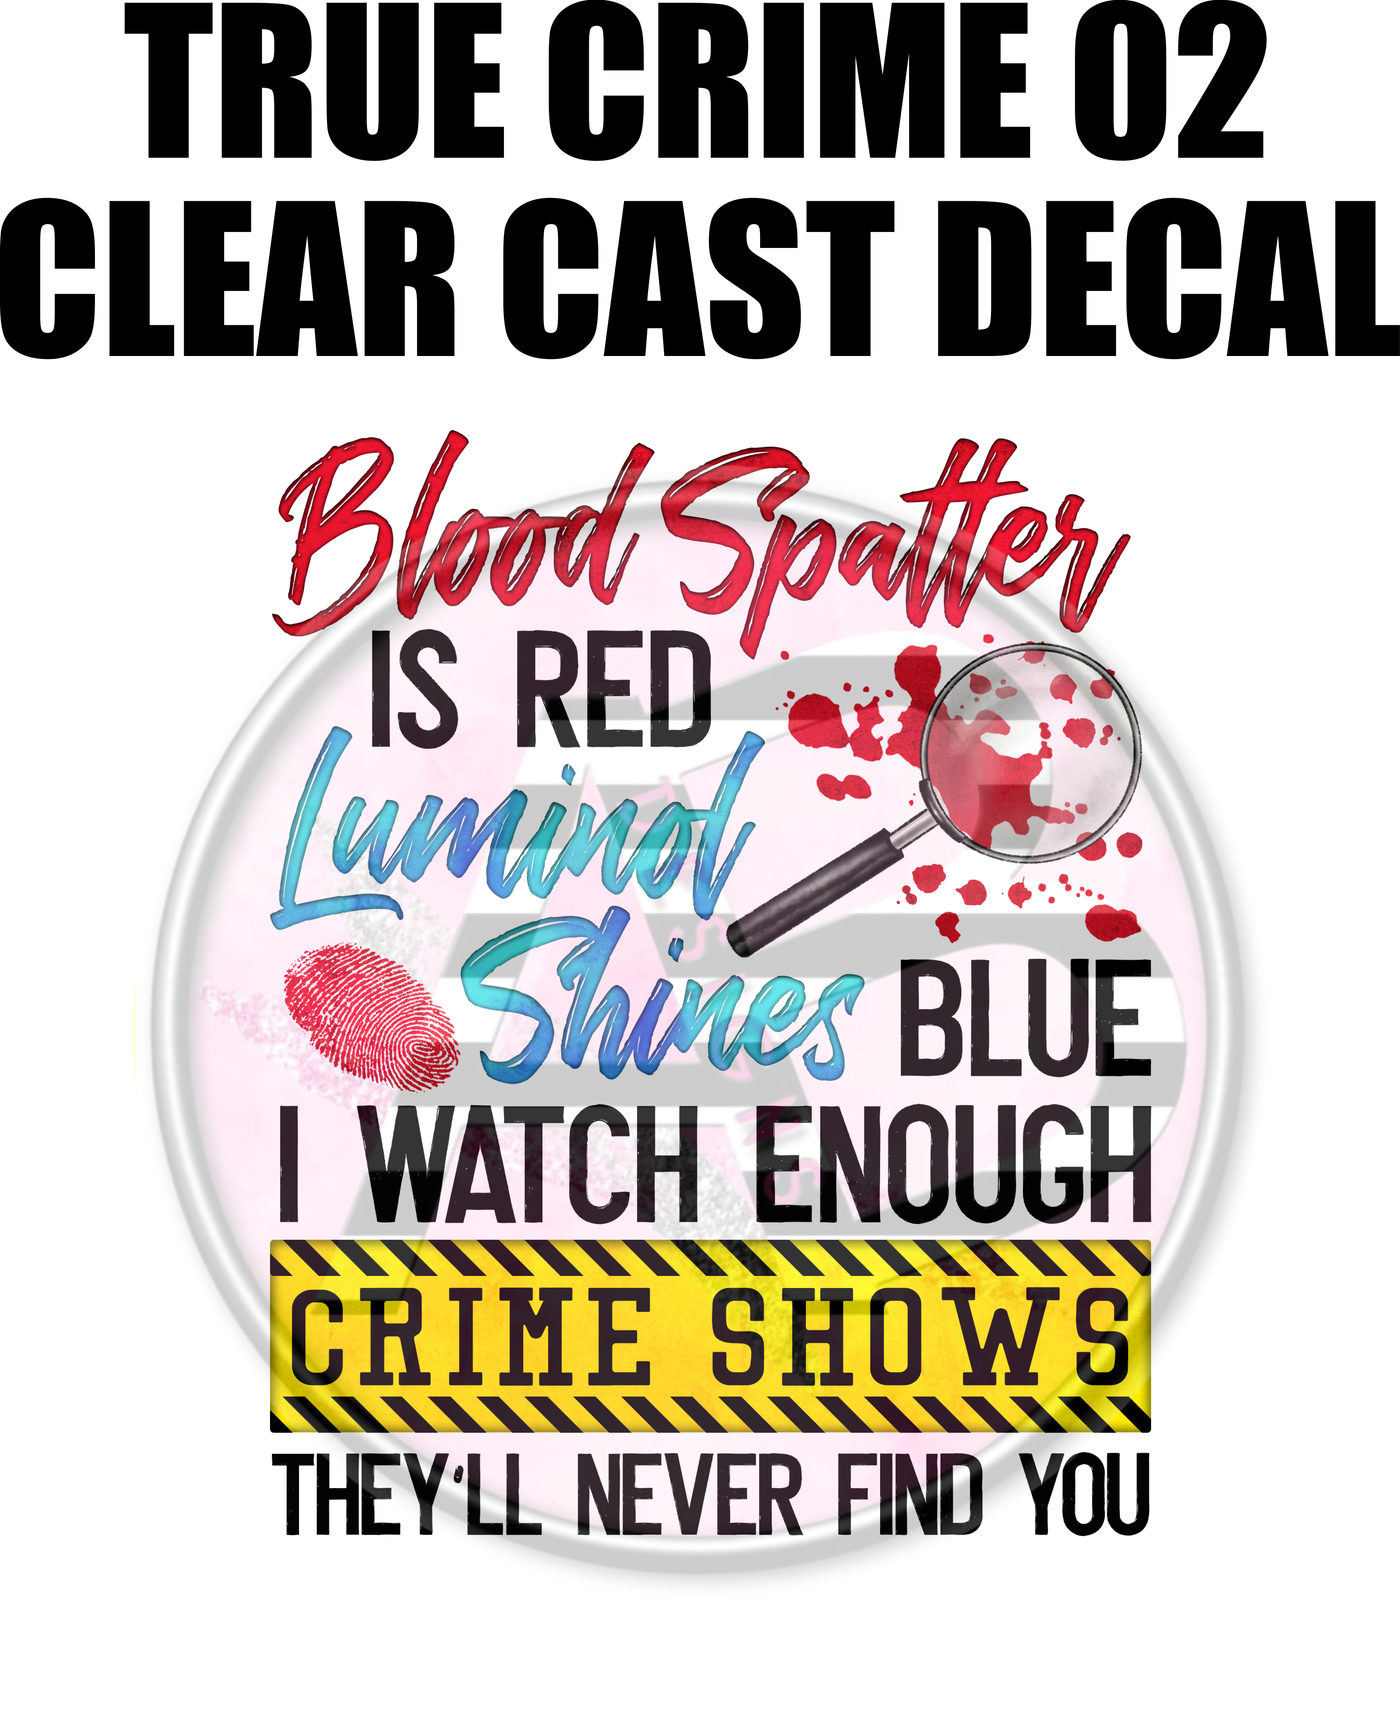 True Crime 02 - Clear Cast Decal